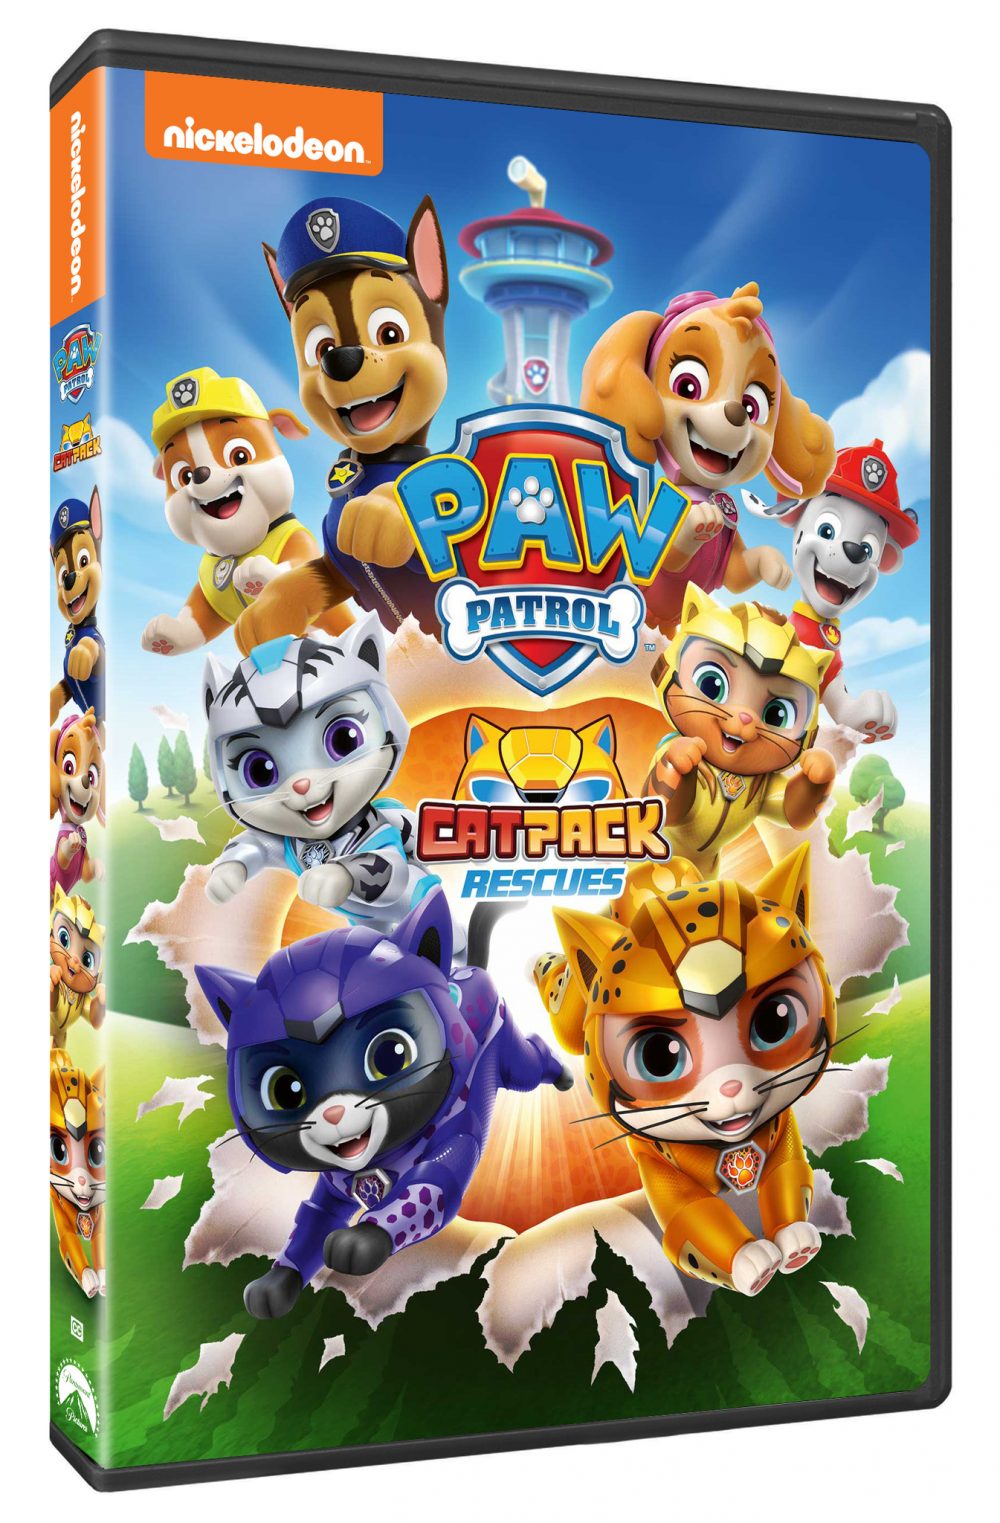 PAW Patrol: Cat Pack Rescues available on DVD on September 13, 2022